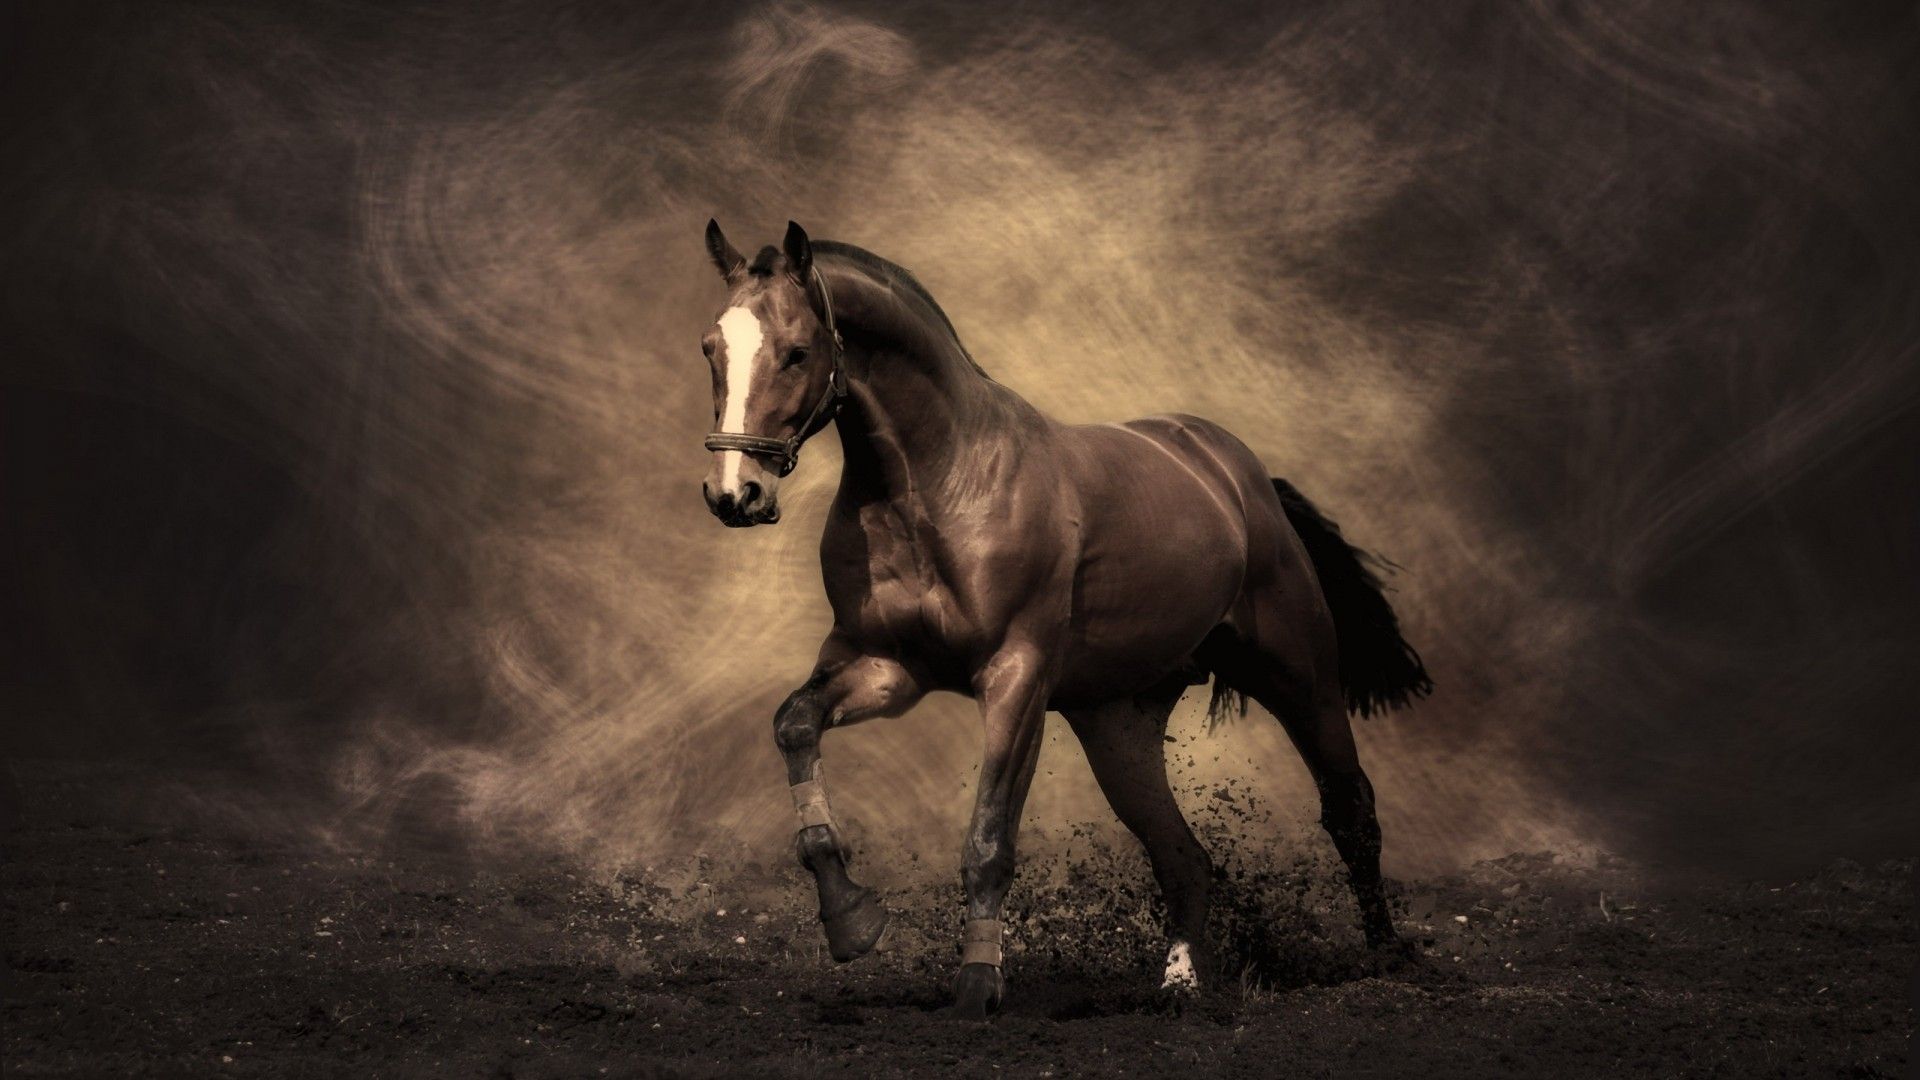 Horse For Computer Wallpapers